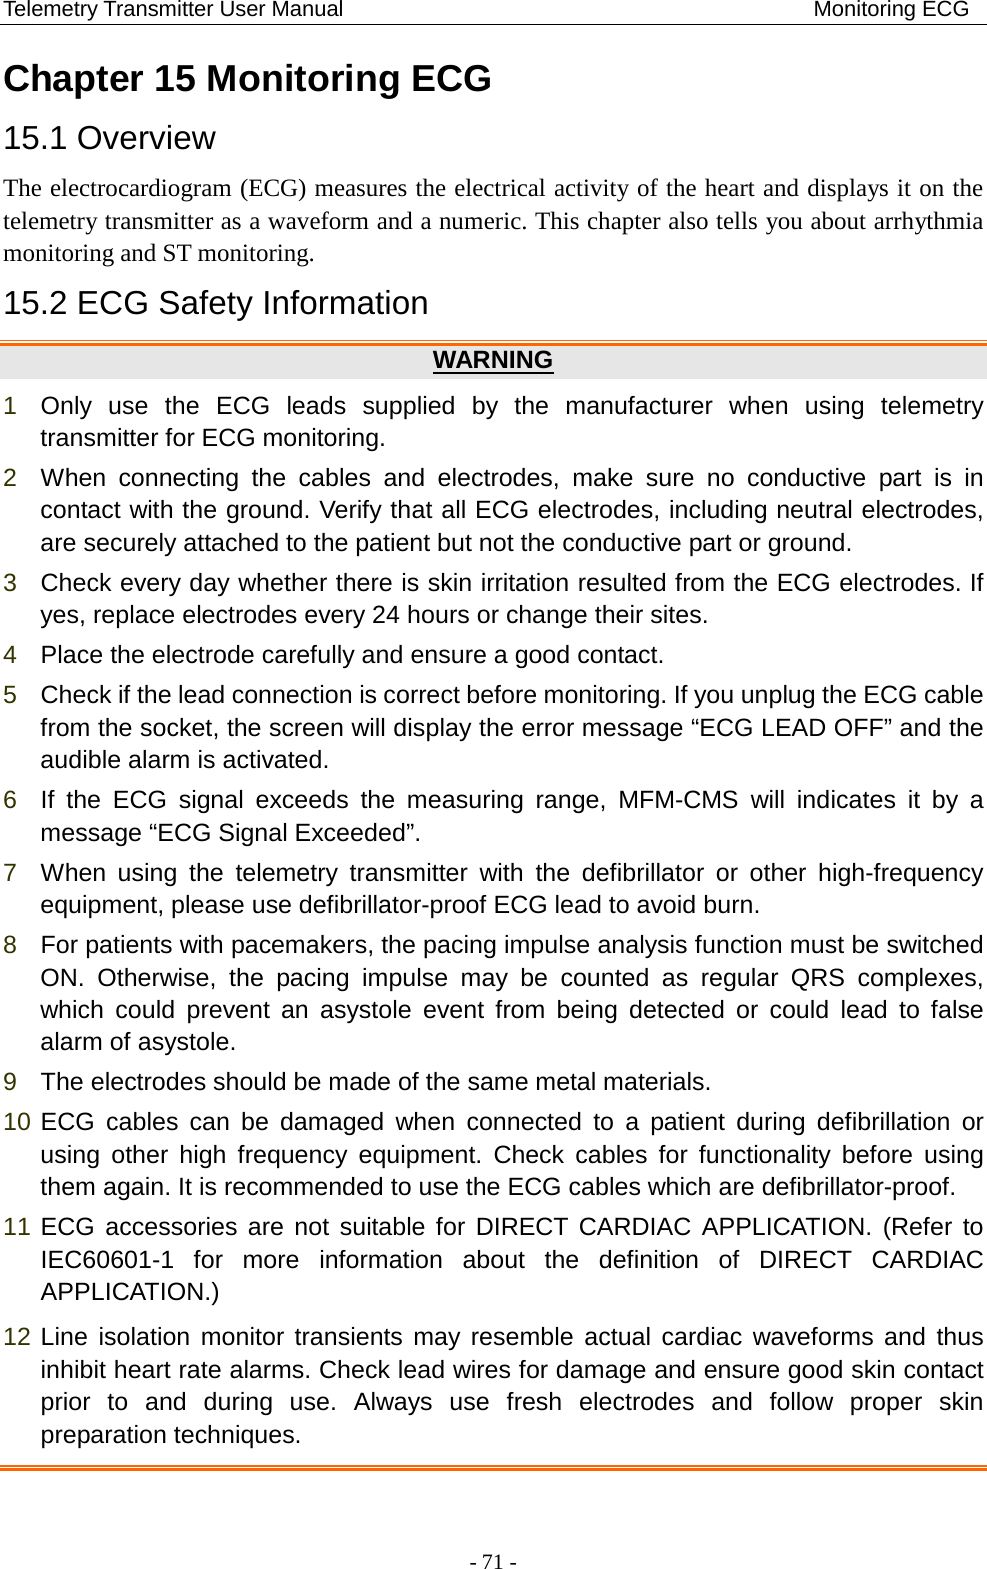 Telemetry Transmitter User Manual                                           Monitoring ECG Chapter 15 Monitoring ECG   15.1 Overview The electrocardiogram (ECG) measures the electrical activity of the heart and displays it on the telemetry transmitter as a waveform and a numeric. This chapter also tells you about arrhythmia monitoring and ST monitoring.   15.2 ECG Safety Information WARNING 1  Only use the ECG leads supplied by the manufacturer when using telemetry transmitter for ECG monitoring.   2  When connecting the cables and electrodes, make sure no conductive part is in contact with the ground. Verify that all ECG electrodes, including neutral electrodes, are securely attached to the patient but not the conductive part or ground. 3  Check every day whether there is skin irritation resulted from the ECG electrodes. If yes, replace electrodes every 24 hours or change their sites. 4  Place the electrode carefully and ensure a good contact. 5  Check if the lead connection is correct before monitoring. If you unplug the ECG cable from the socket, the screen will display the error message “ECG LEAD OFF” and the audible alarm is activated. 6  If the ECG signal exceeds the measuring range, MFM-CMS will indicates it by a message “ECG Signal Exceeded”. 7  When using the telemetry transmitter with the defibrillator or other high-frequency equipment, please use defibrillator-proof ECG lead to avoid burn. 8  For patients with pacemakers, the pacing impulse analysis function must be switched ON. Otherwise, the pacing impulse may be counted as regular QRS complexes, which  could prevent an asystole event from being detected or  could lead to false alarm of asystole. 9  The electrodes should be made of the same metal materials. 10 ECG cables can be damaged when connected to a patient during defibrillation or using other high frequency equipment. Check cables for functionality before using them again. It is recommended to use the ECG cables which are defibrillator-proof. 11 ECG accessories are not suitable for DIRECT CARDIAC APPLICATION. (Refer to IEC60601-1 for more information about the definition of DIRECT CARDIAC APPLICATION.) 12 Line isolation monitor transients may resemble actual cardiac waveforms and thus inhibit heart rate alarms. Check lead wires for damage and ensure good skin contact prior to and during use. Always use fresh electrodes and follow proper skin preparation techniques.  - 71 - 